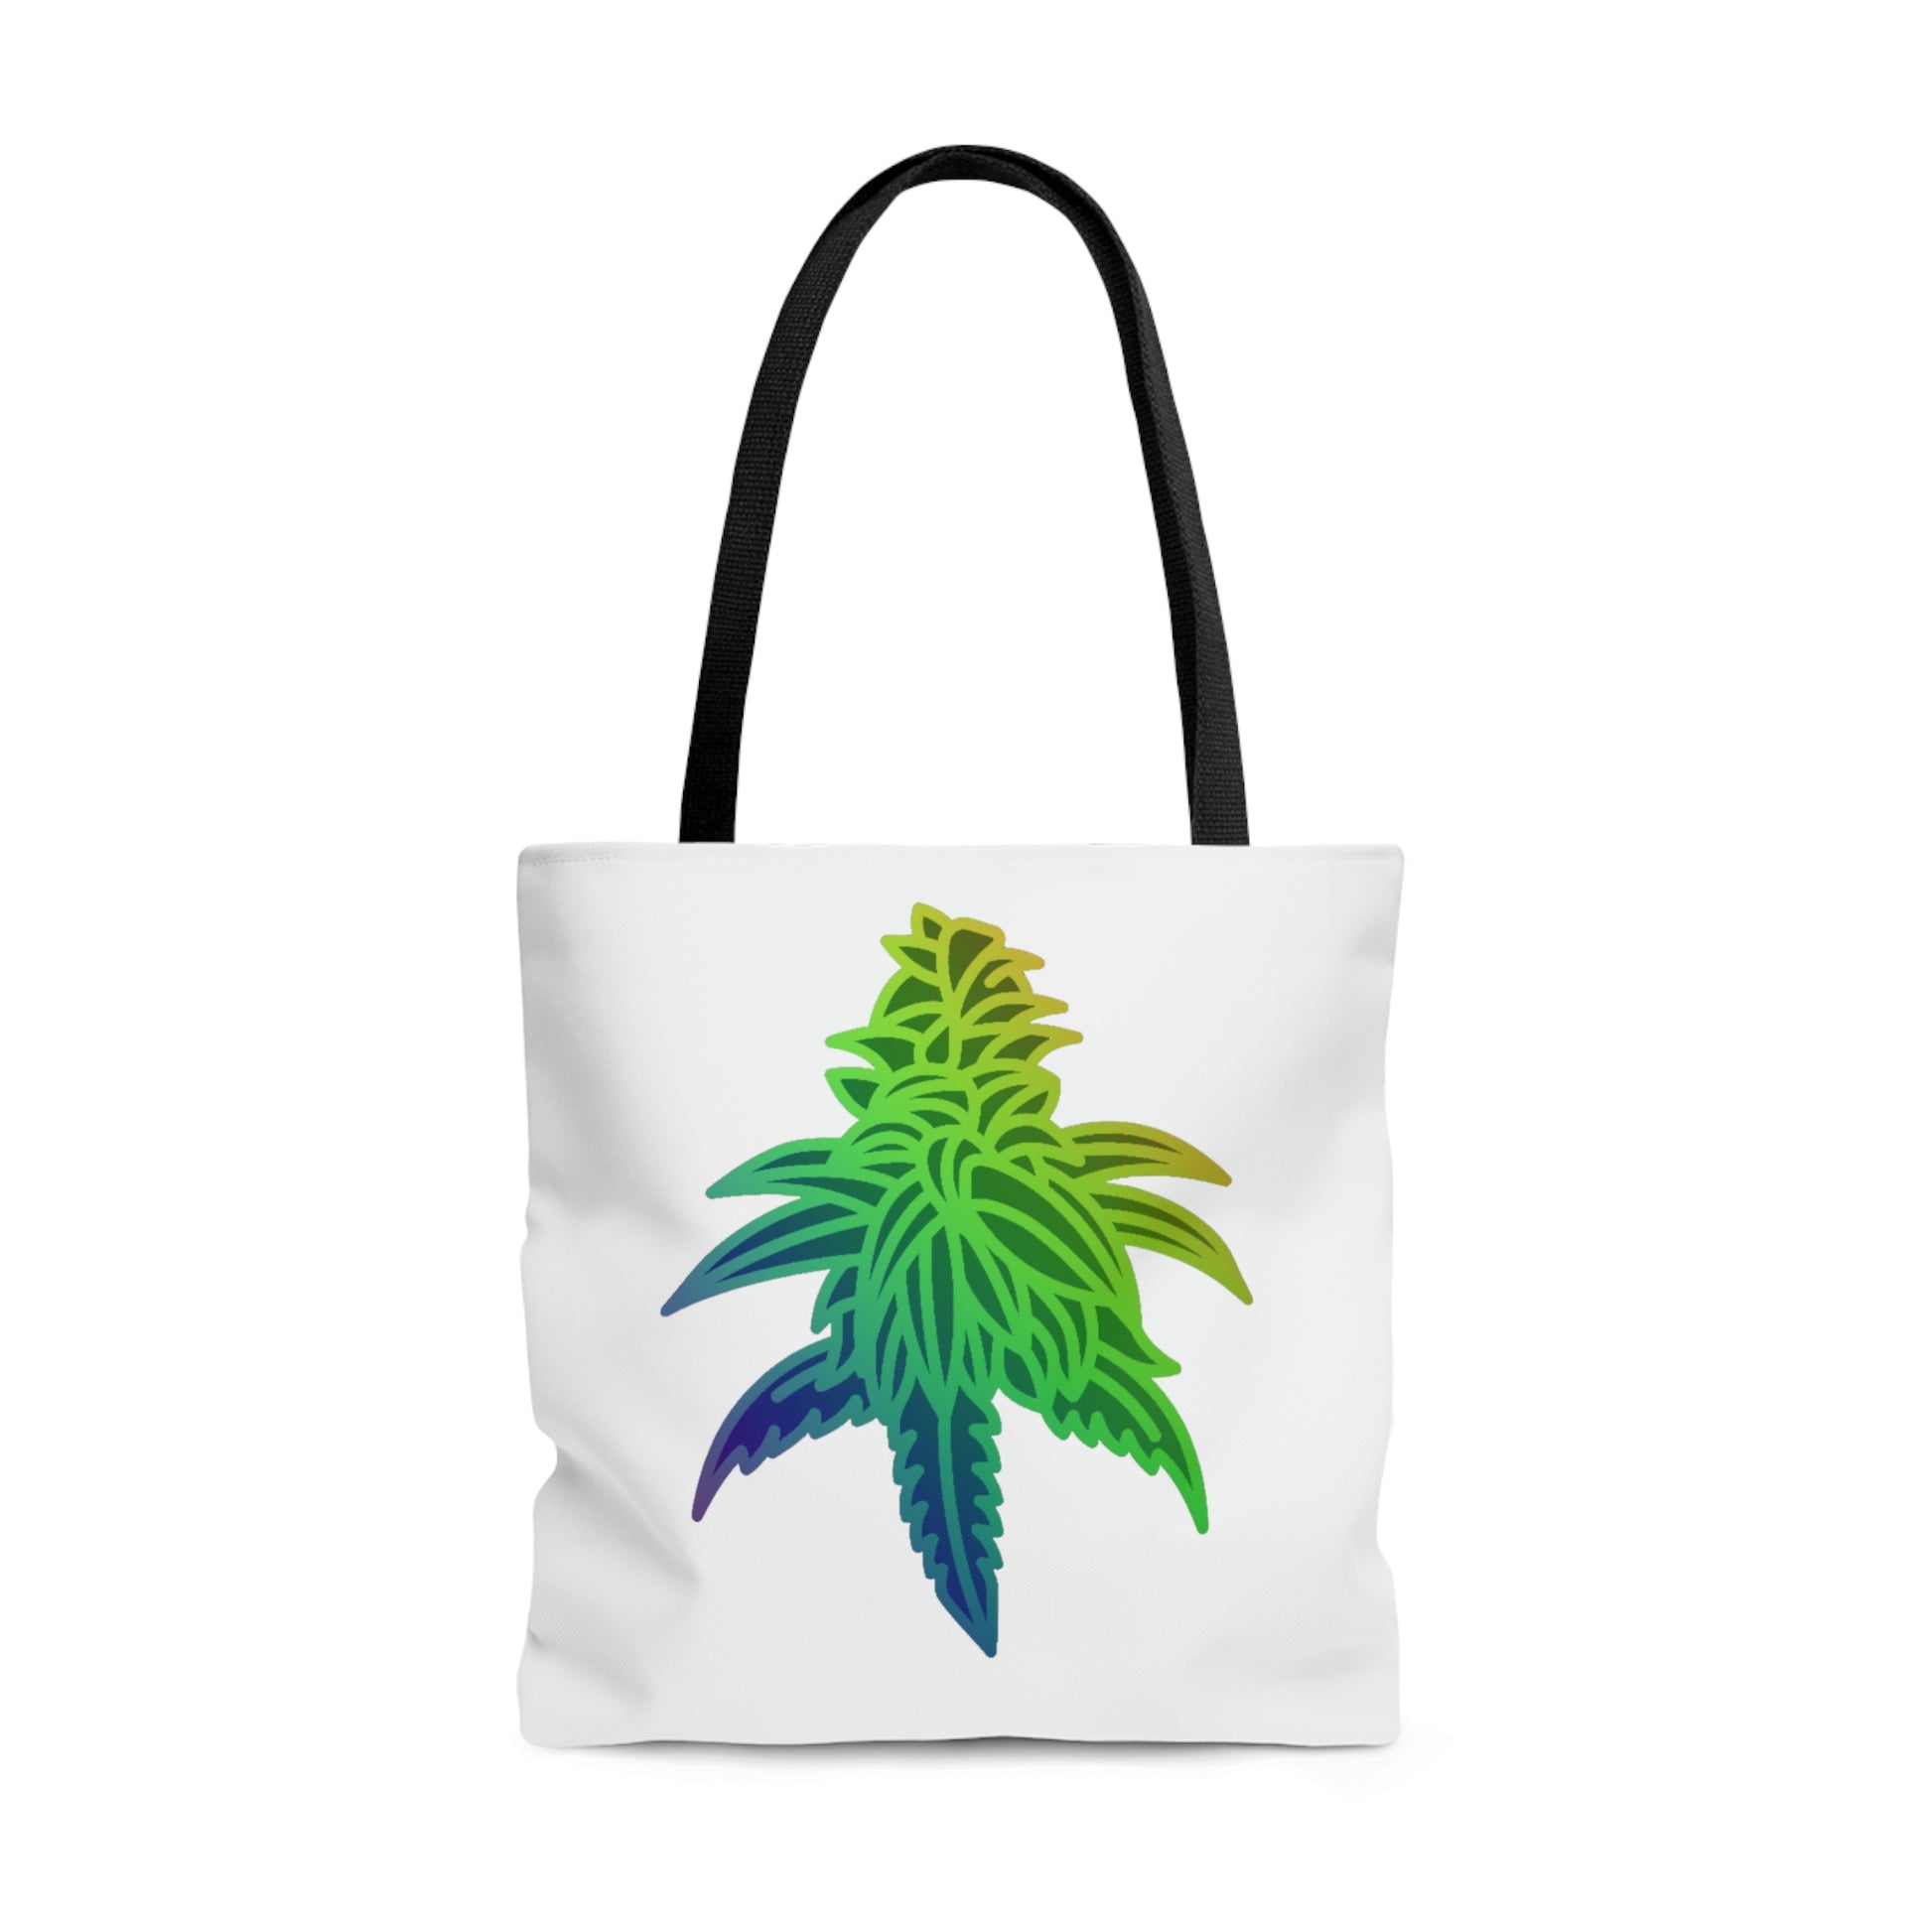 This white tote bag has black straps and a large rainbow nug on front to create the exotic Rainbow Sherbet Marijuana Tote Bag